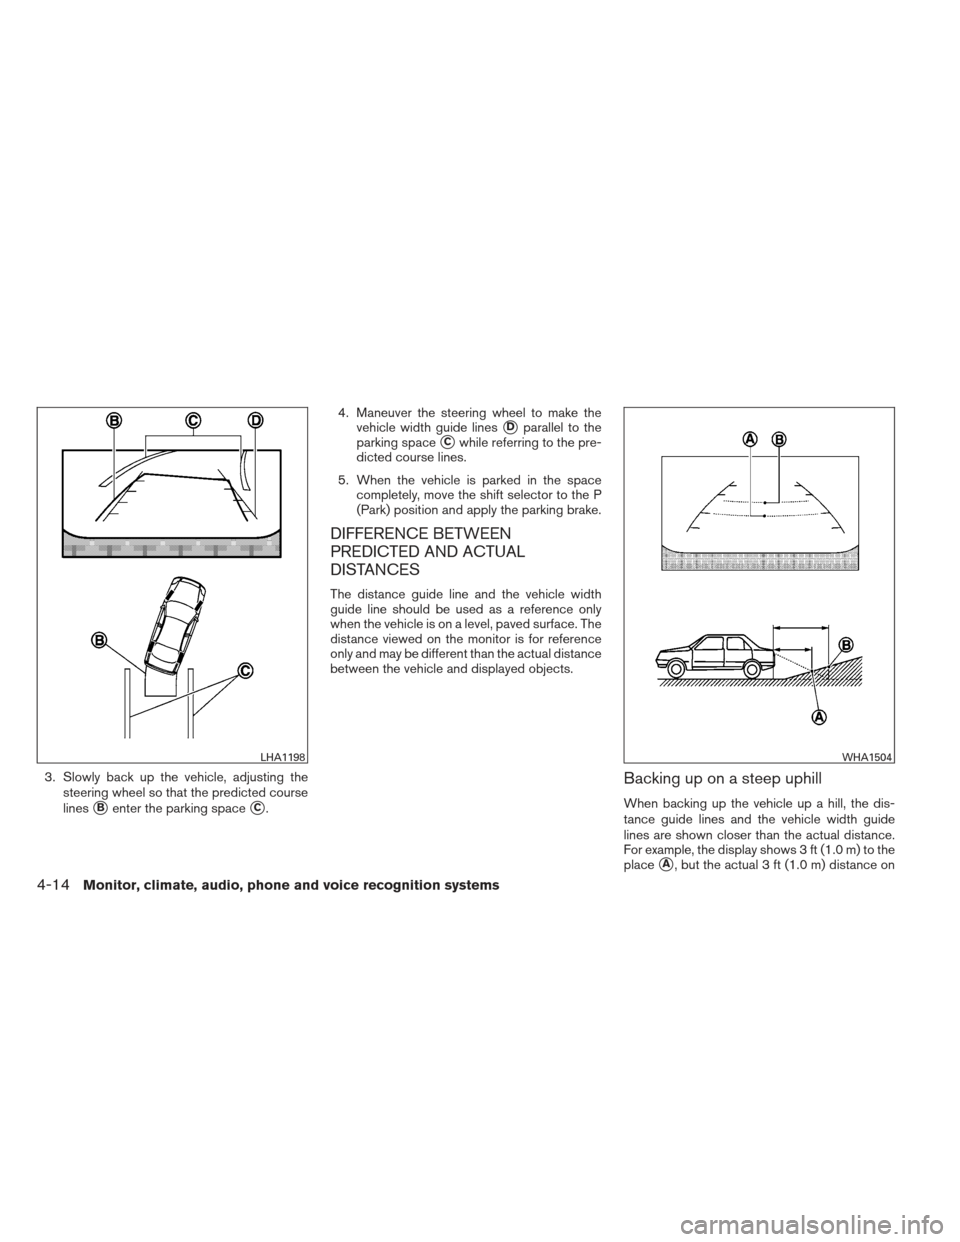 NISSAN ALTIMA 2013 L33 / 5.G User Guide 3. Slowly back up the vehicle, adjusting thesteering wheel so that the predicted course
lines
Benter the parking spaceC. 4. Maneuver the steering wheel to make the
vehicle width guide lines
Dparall